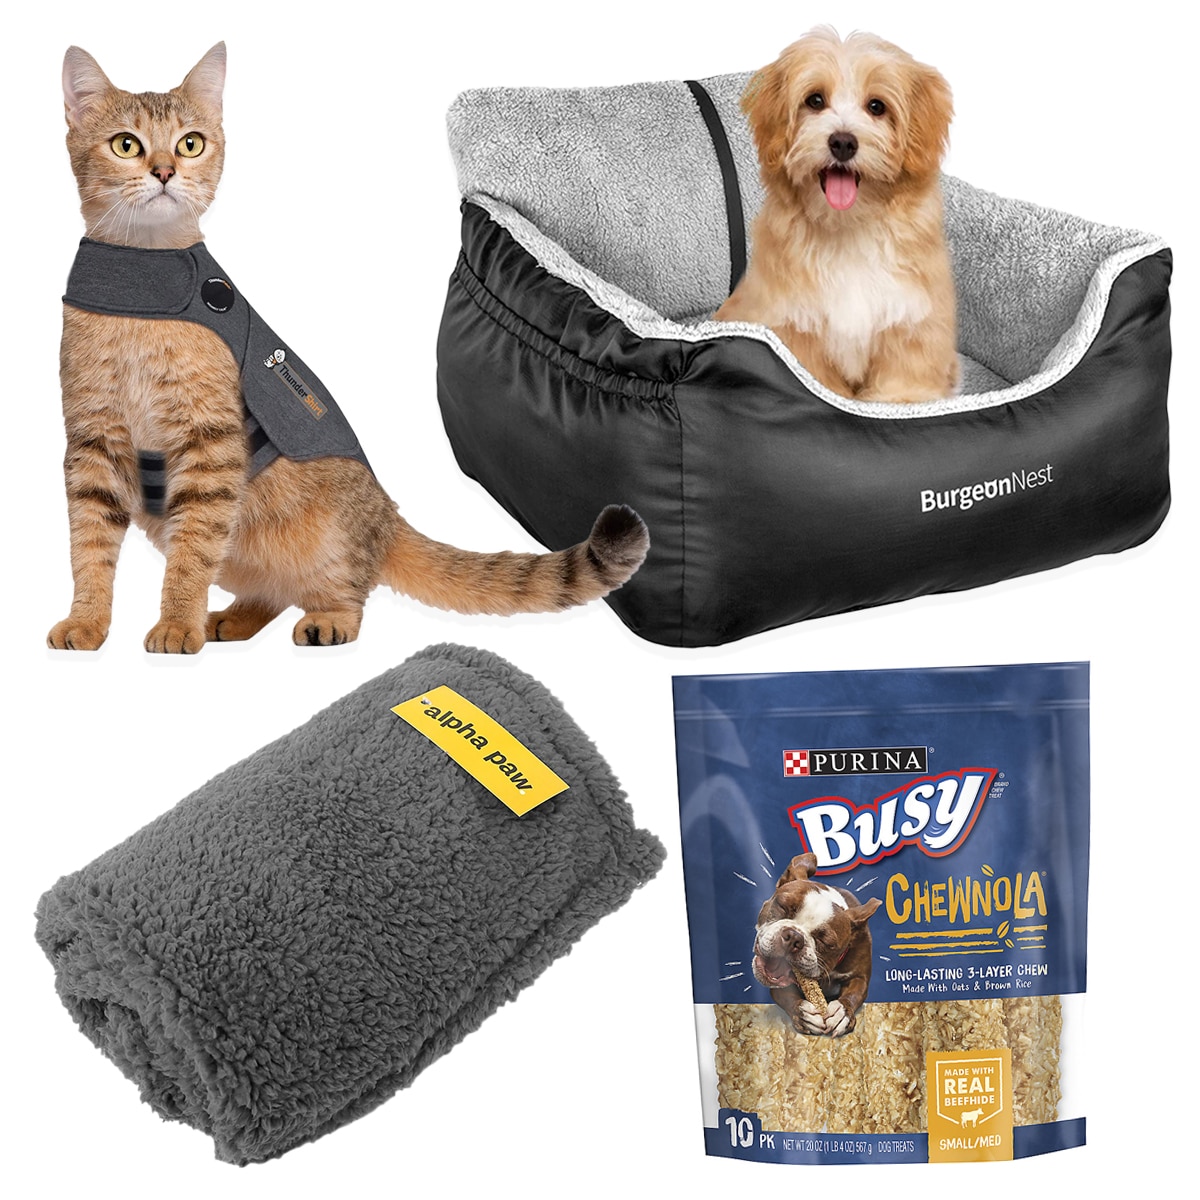 Ecomm: Pet Anxiety Products